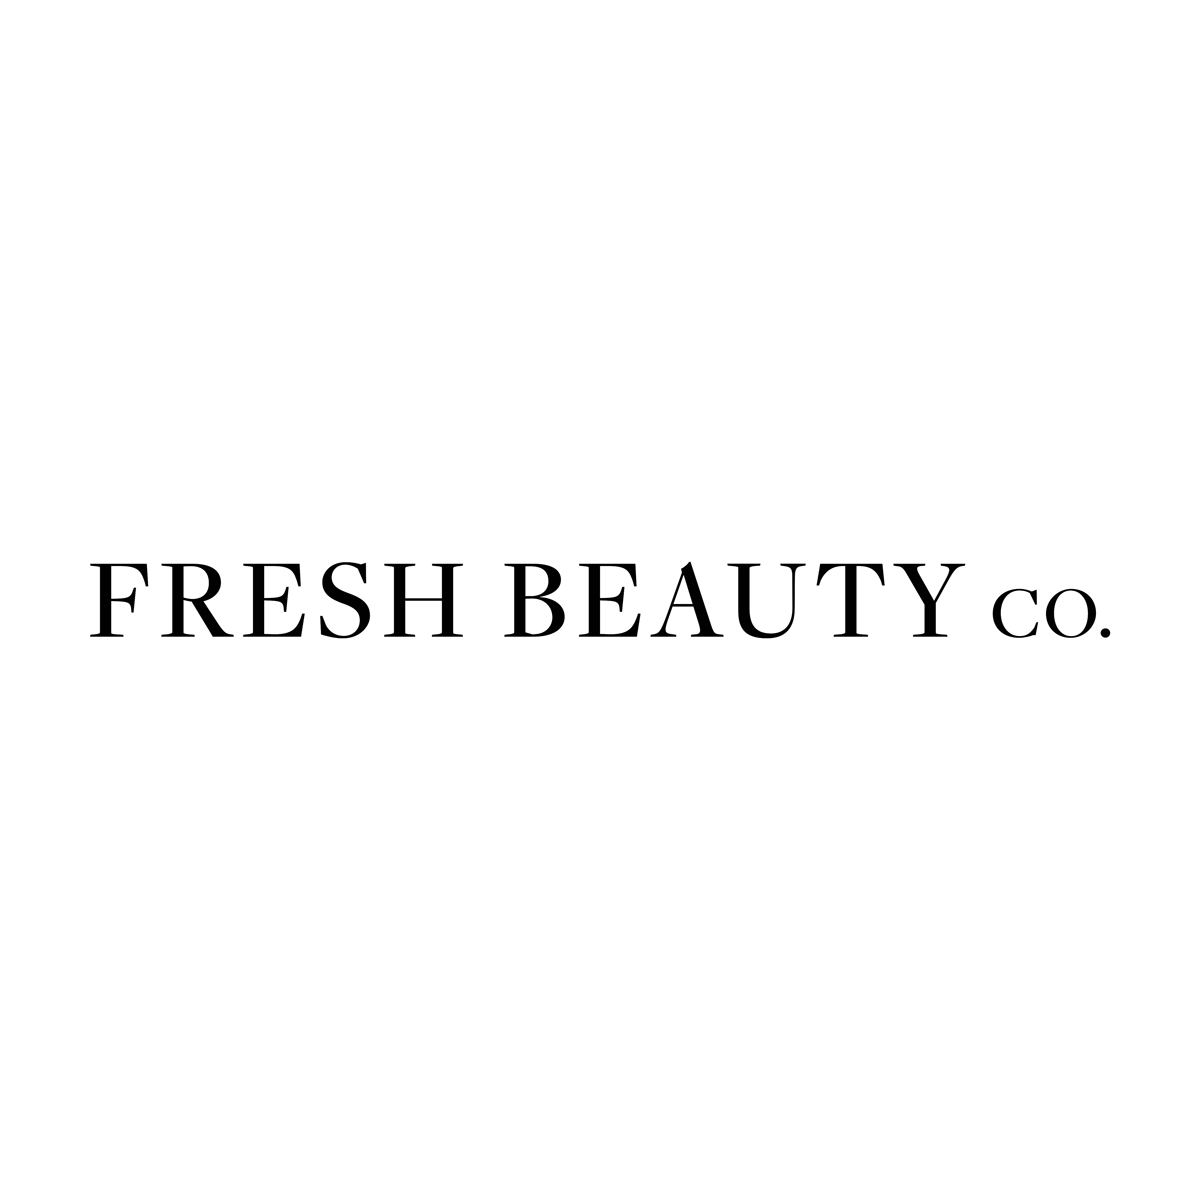 VERIFIED Fresh Beauty Co Discount Code WORKING [month] [year] 2